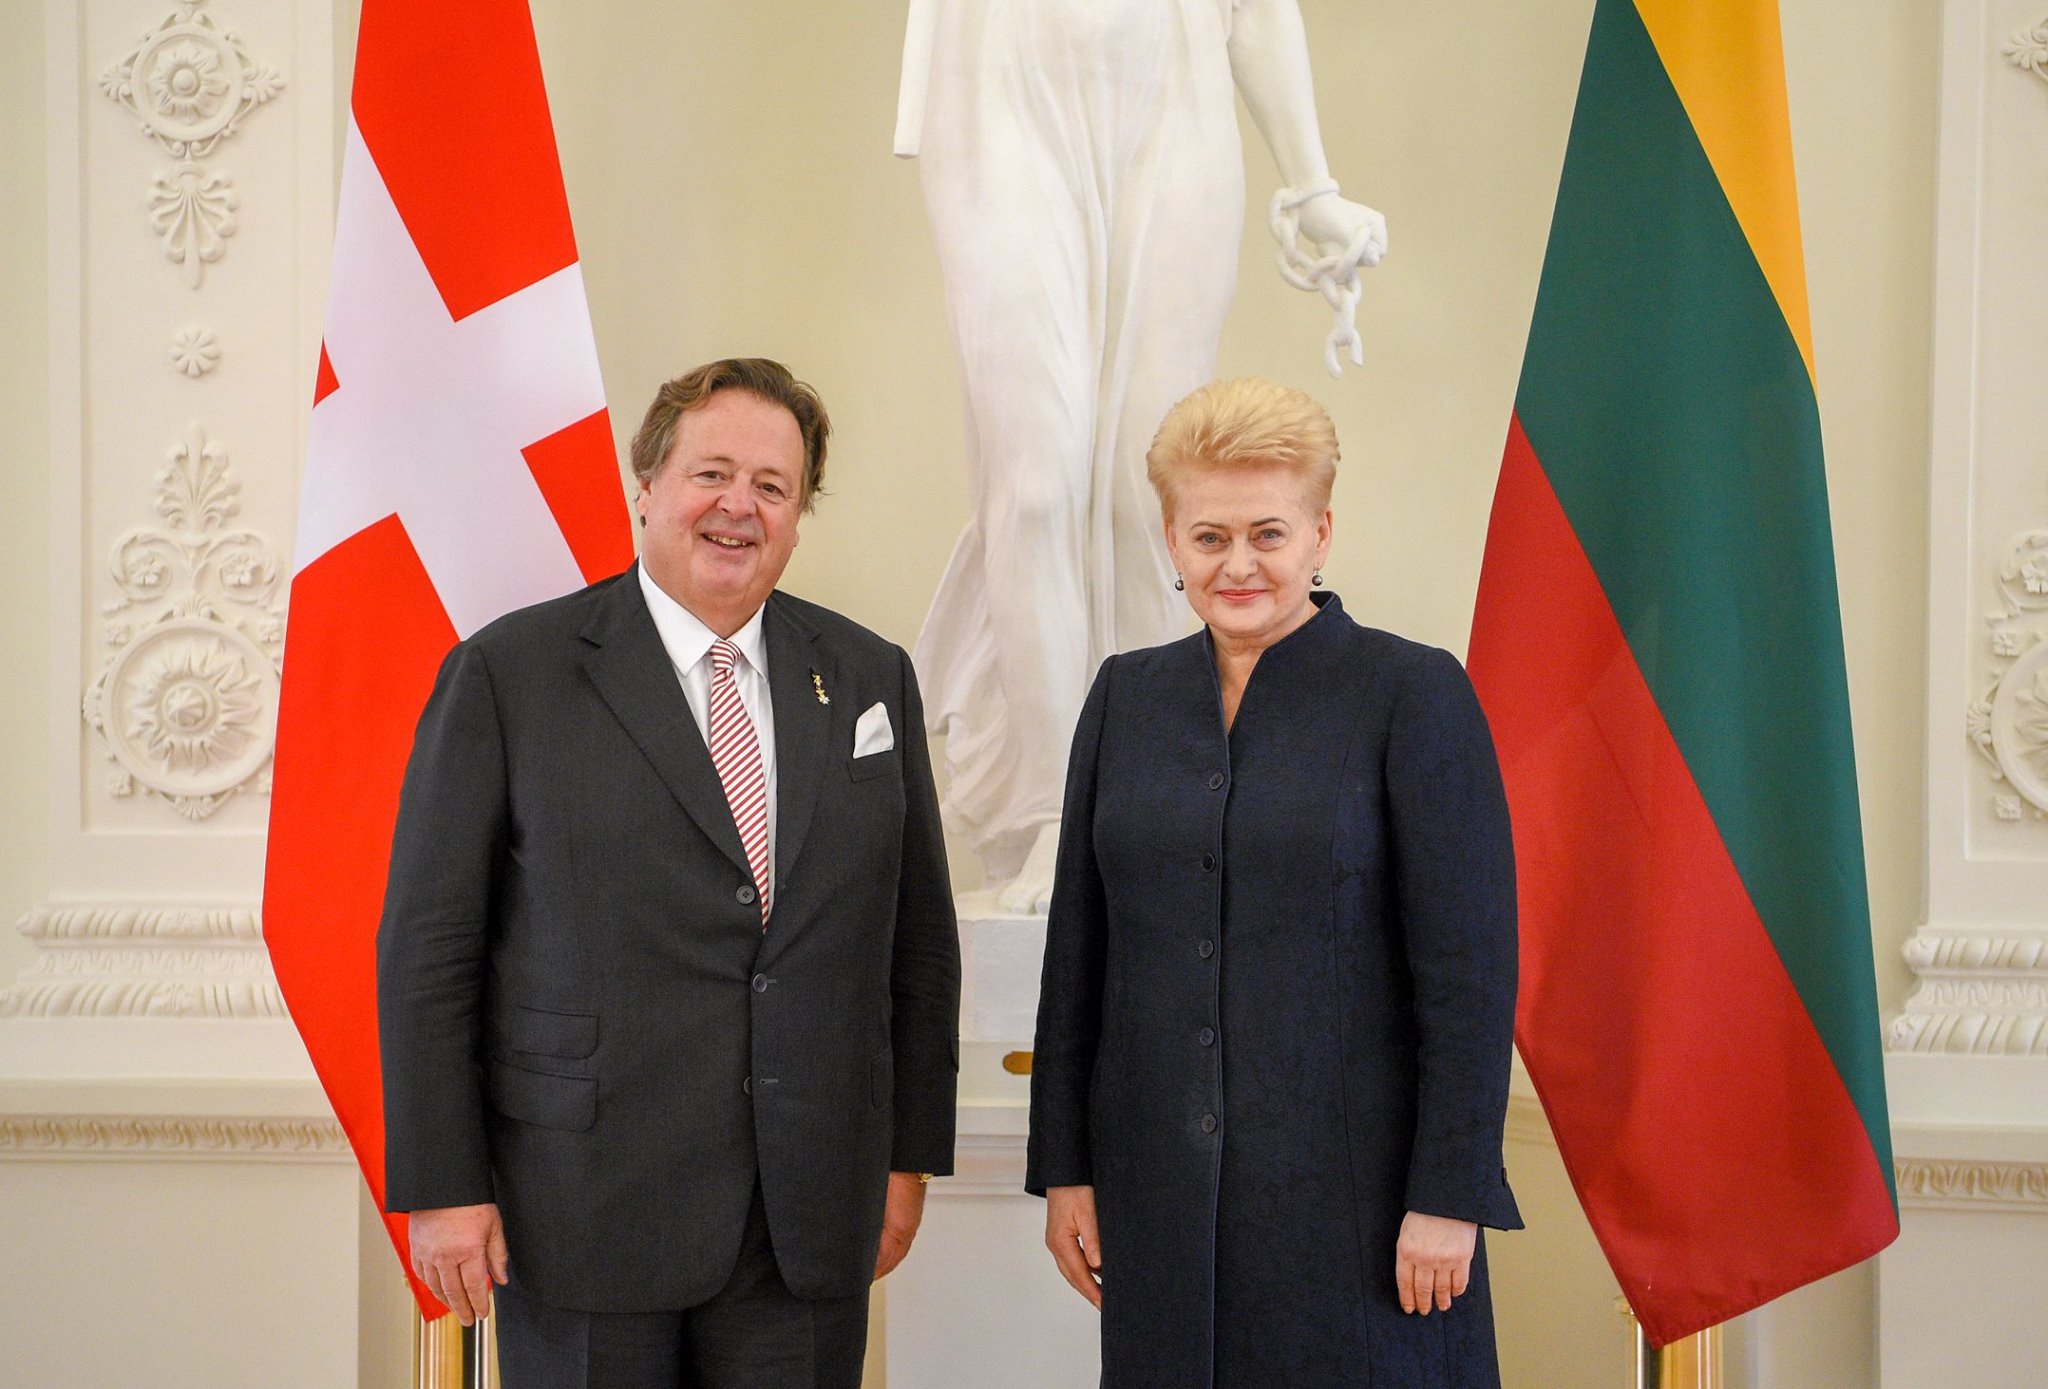 The President of Lithuania received letters of credence from the Order of Malta’s ambassador